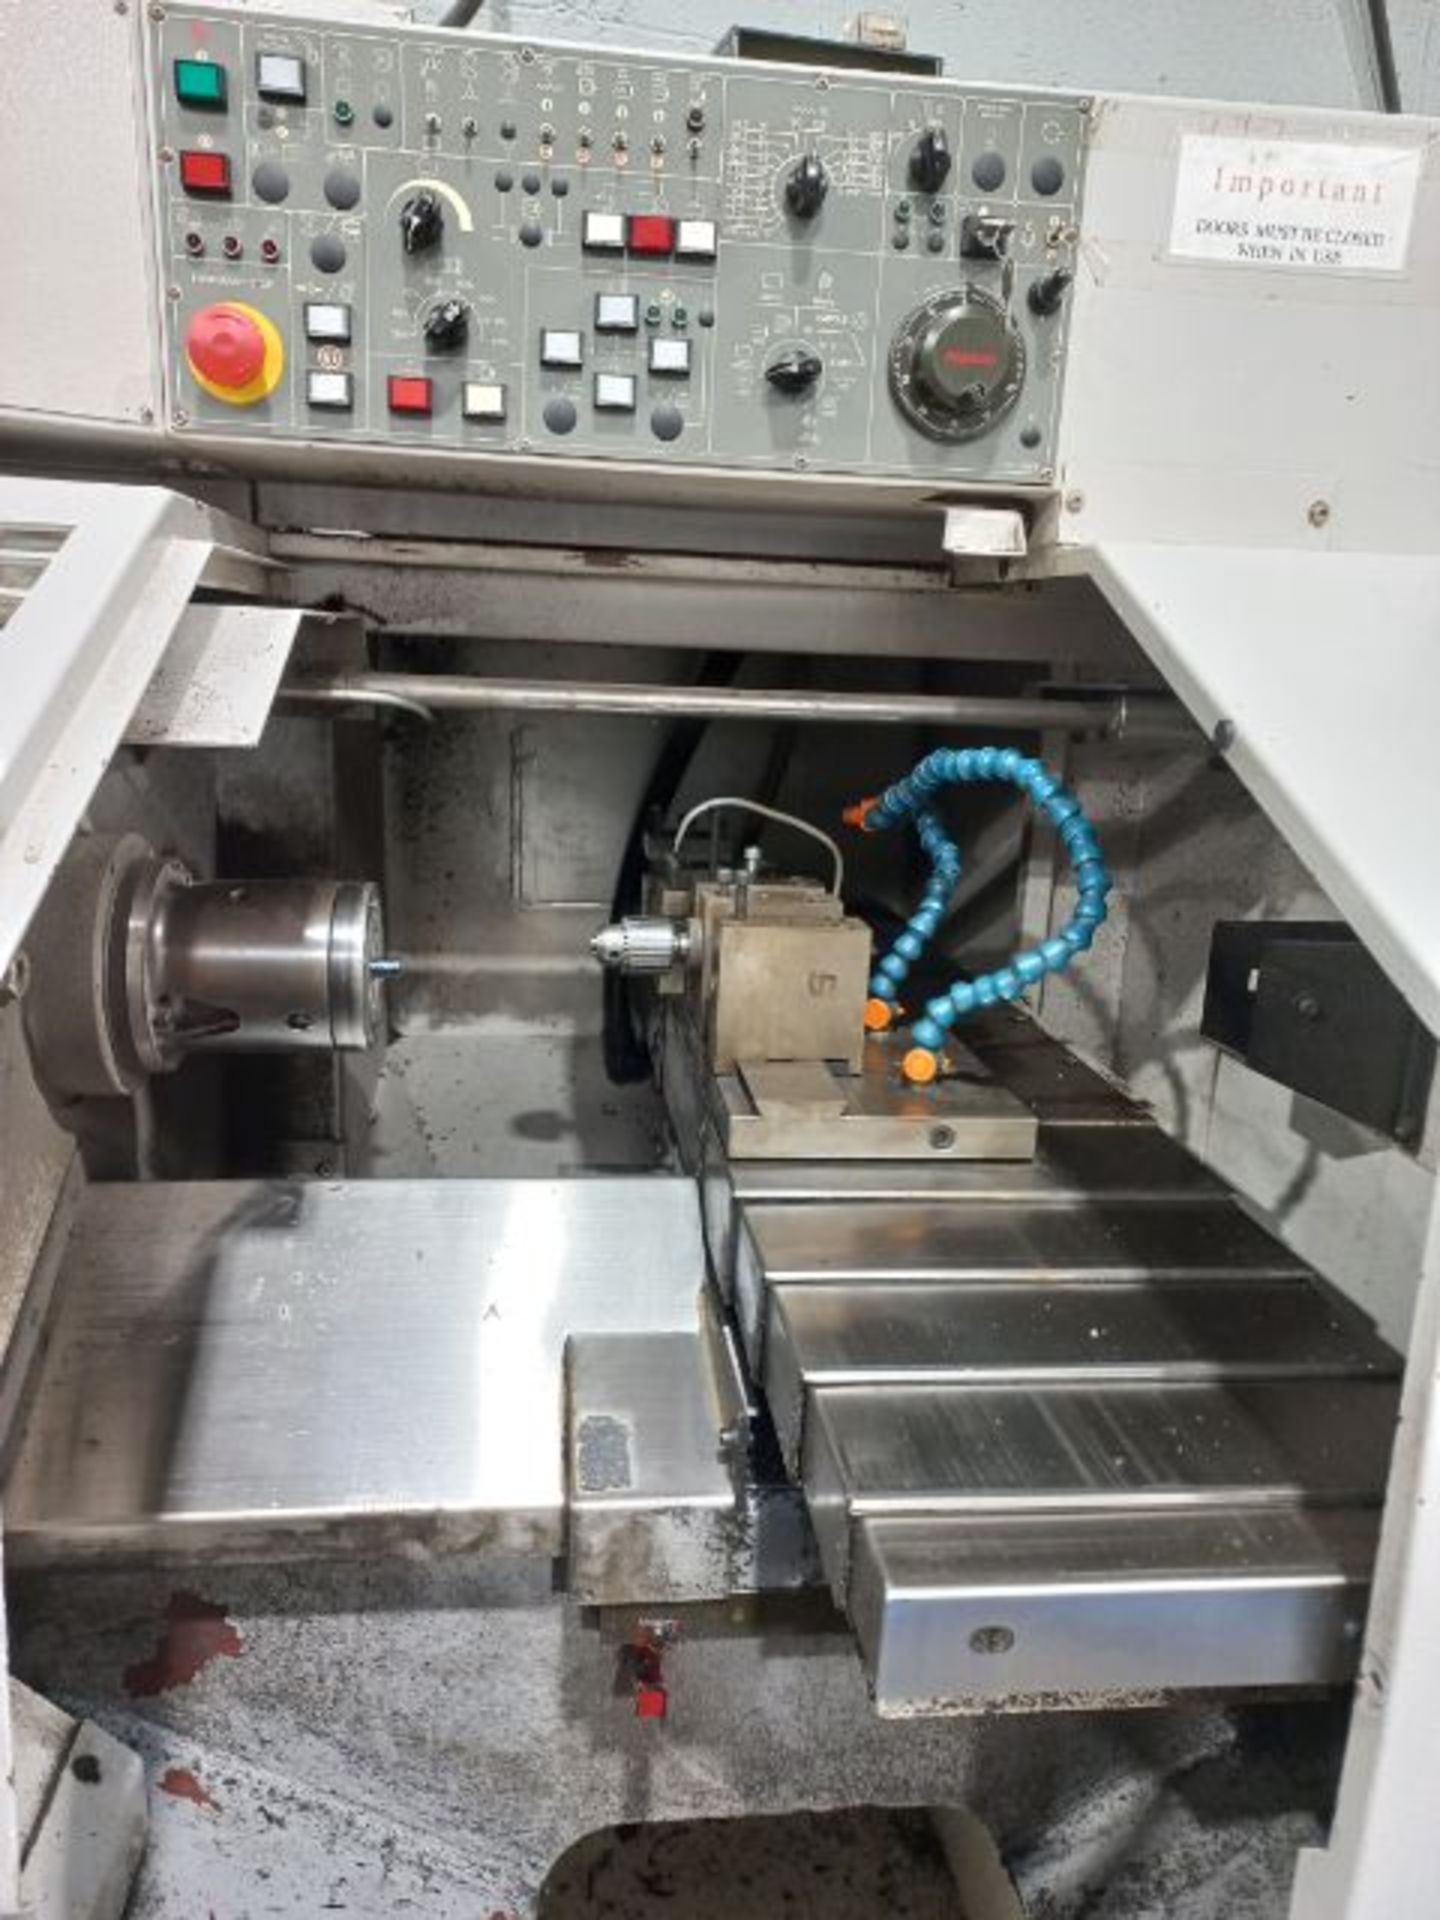 Goodway TA-32 CNC Lathe (2002) Serial Number 81692 with Goodway BF-654 Bar Feed (Location: Earls - Bild 9 aus 10